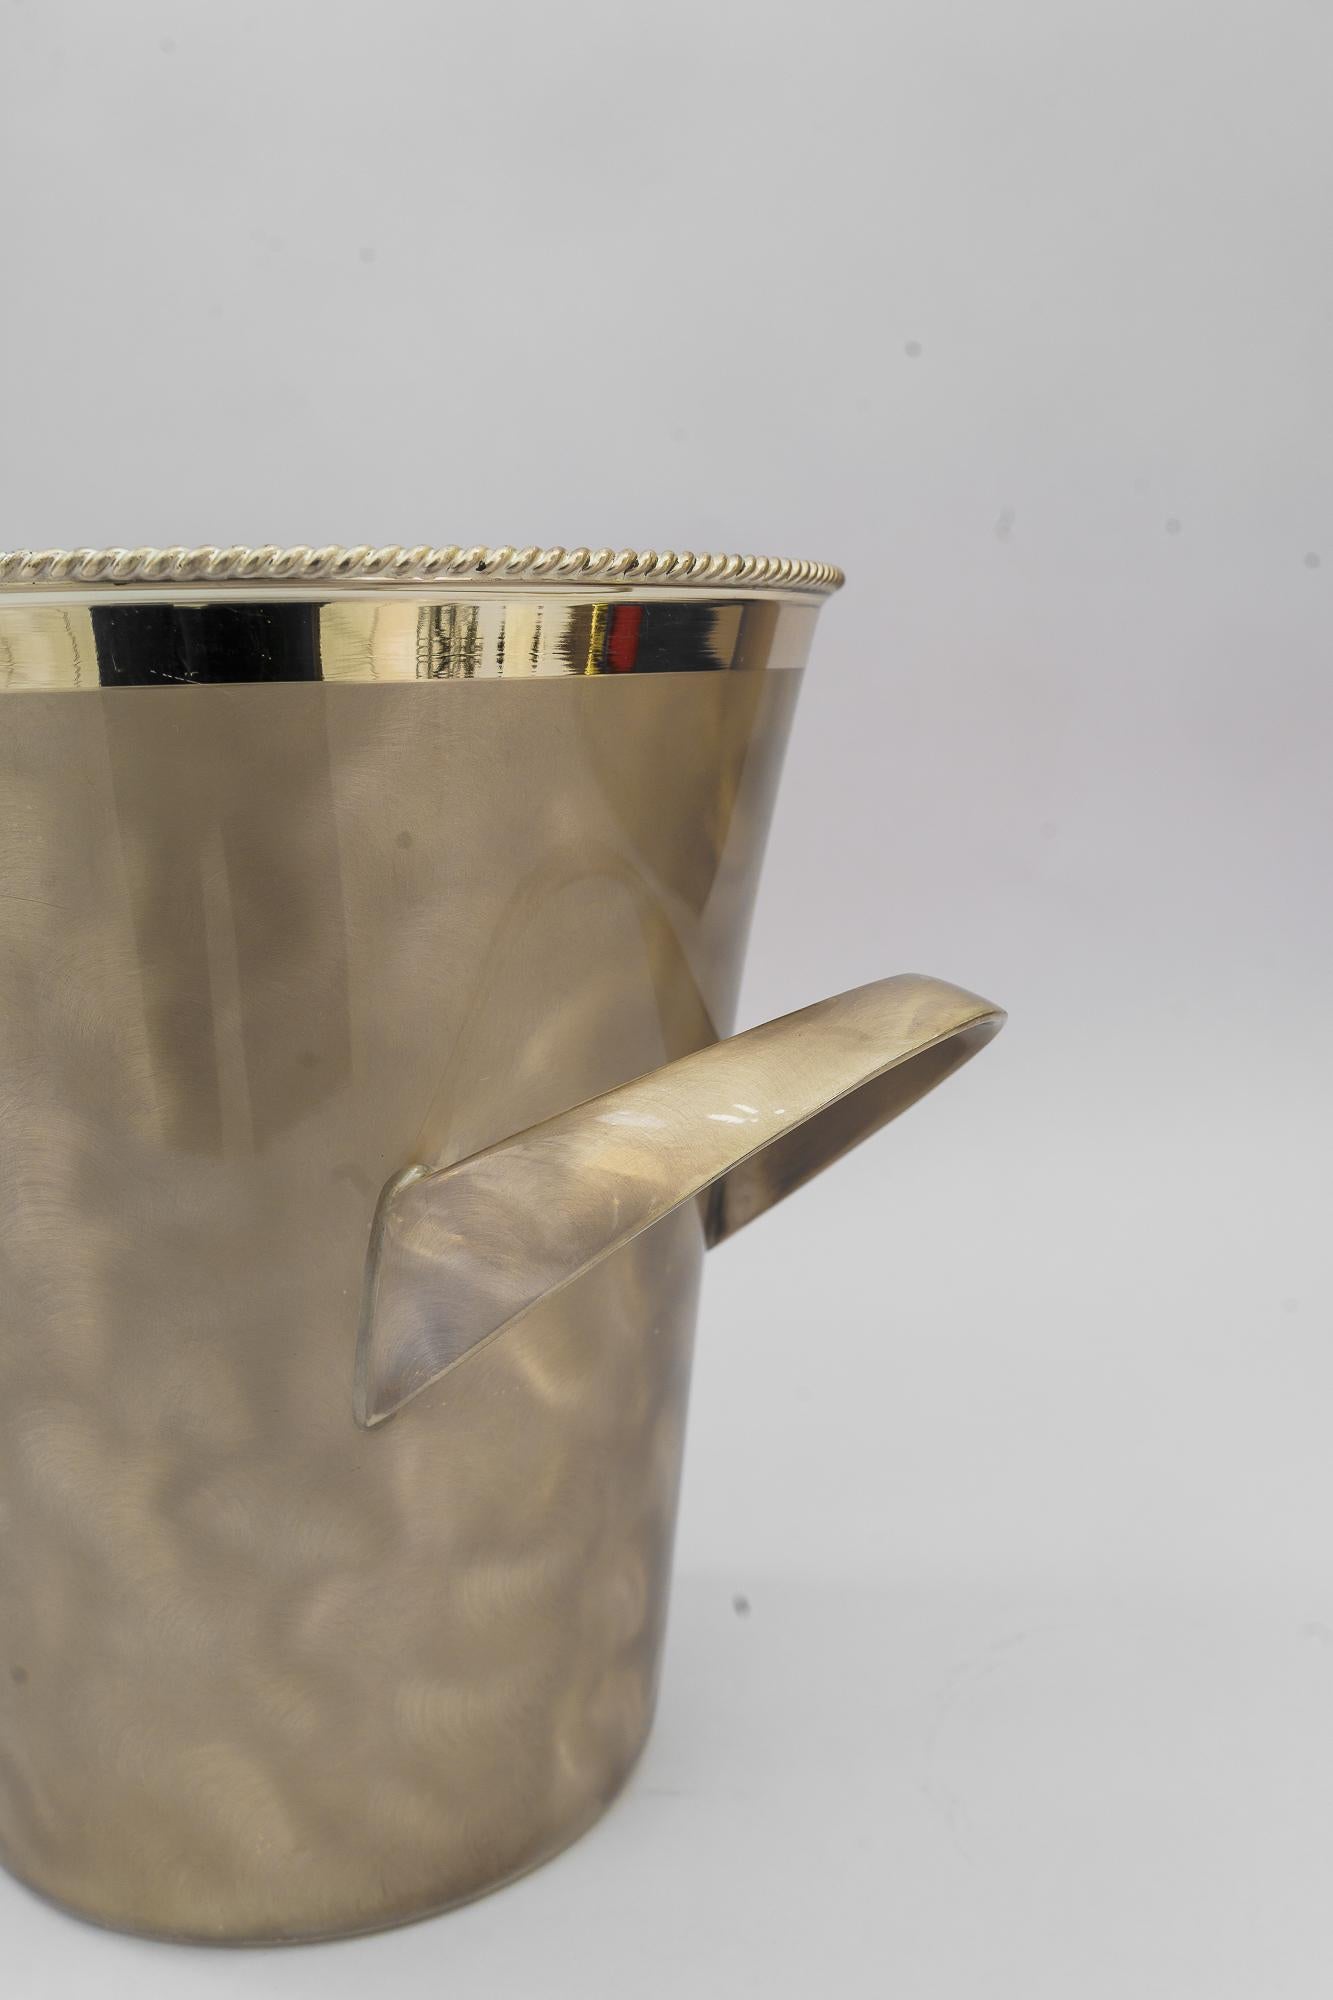 Mid-20th Century Silvered Art Deco Champagne Cooler, by Kurt Mayer 1960s ( marked by WMF ) For Sale